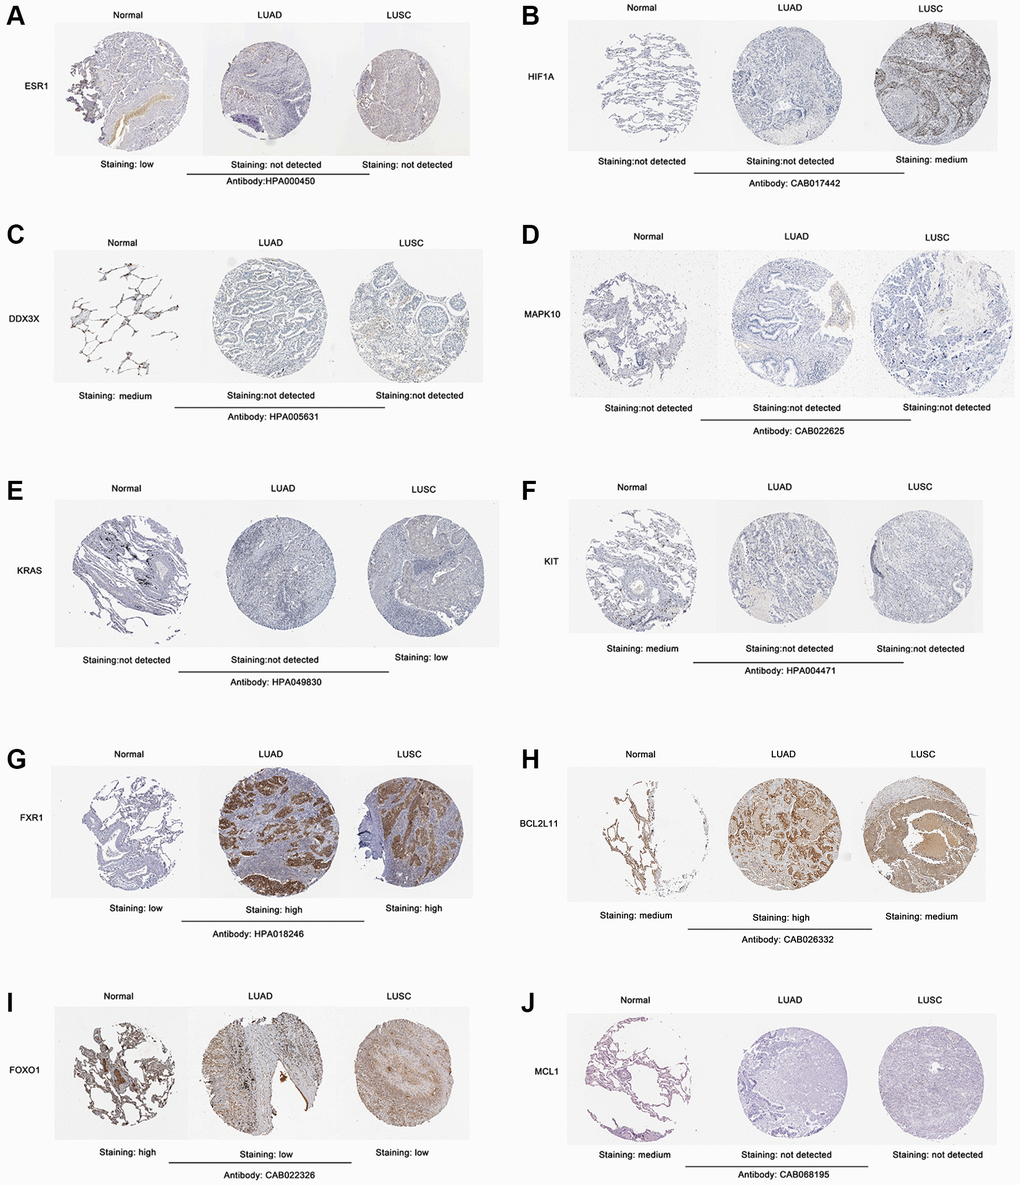 Validation of the protein expression level of screened 10 hub genes in lung cancer samples according to the IHC images in The Human Protein Atlas database. (A) ESR1. (B) HIF1A. (C) DDX3X. (D) MAPK10. (E) KRAS. (F) KIT. (G) FXR1. (H) BCL2L11. (I) FOXO1. (J) MCL1. Abbreviation: IHC: Immunohistochemistry.